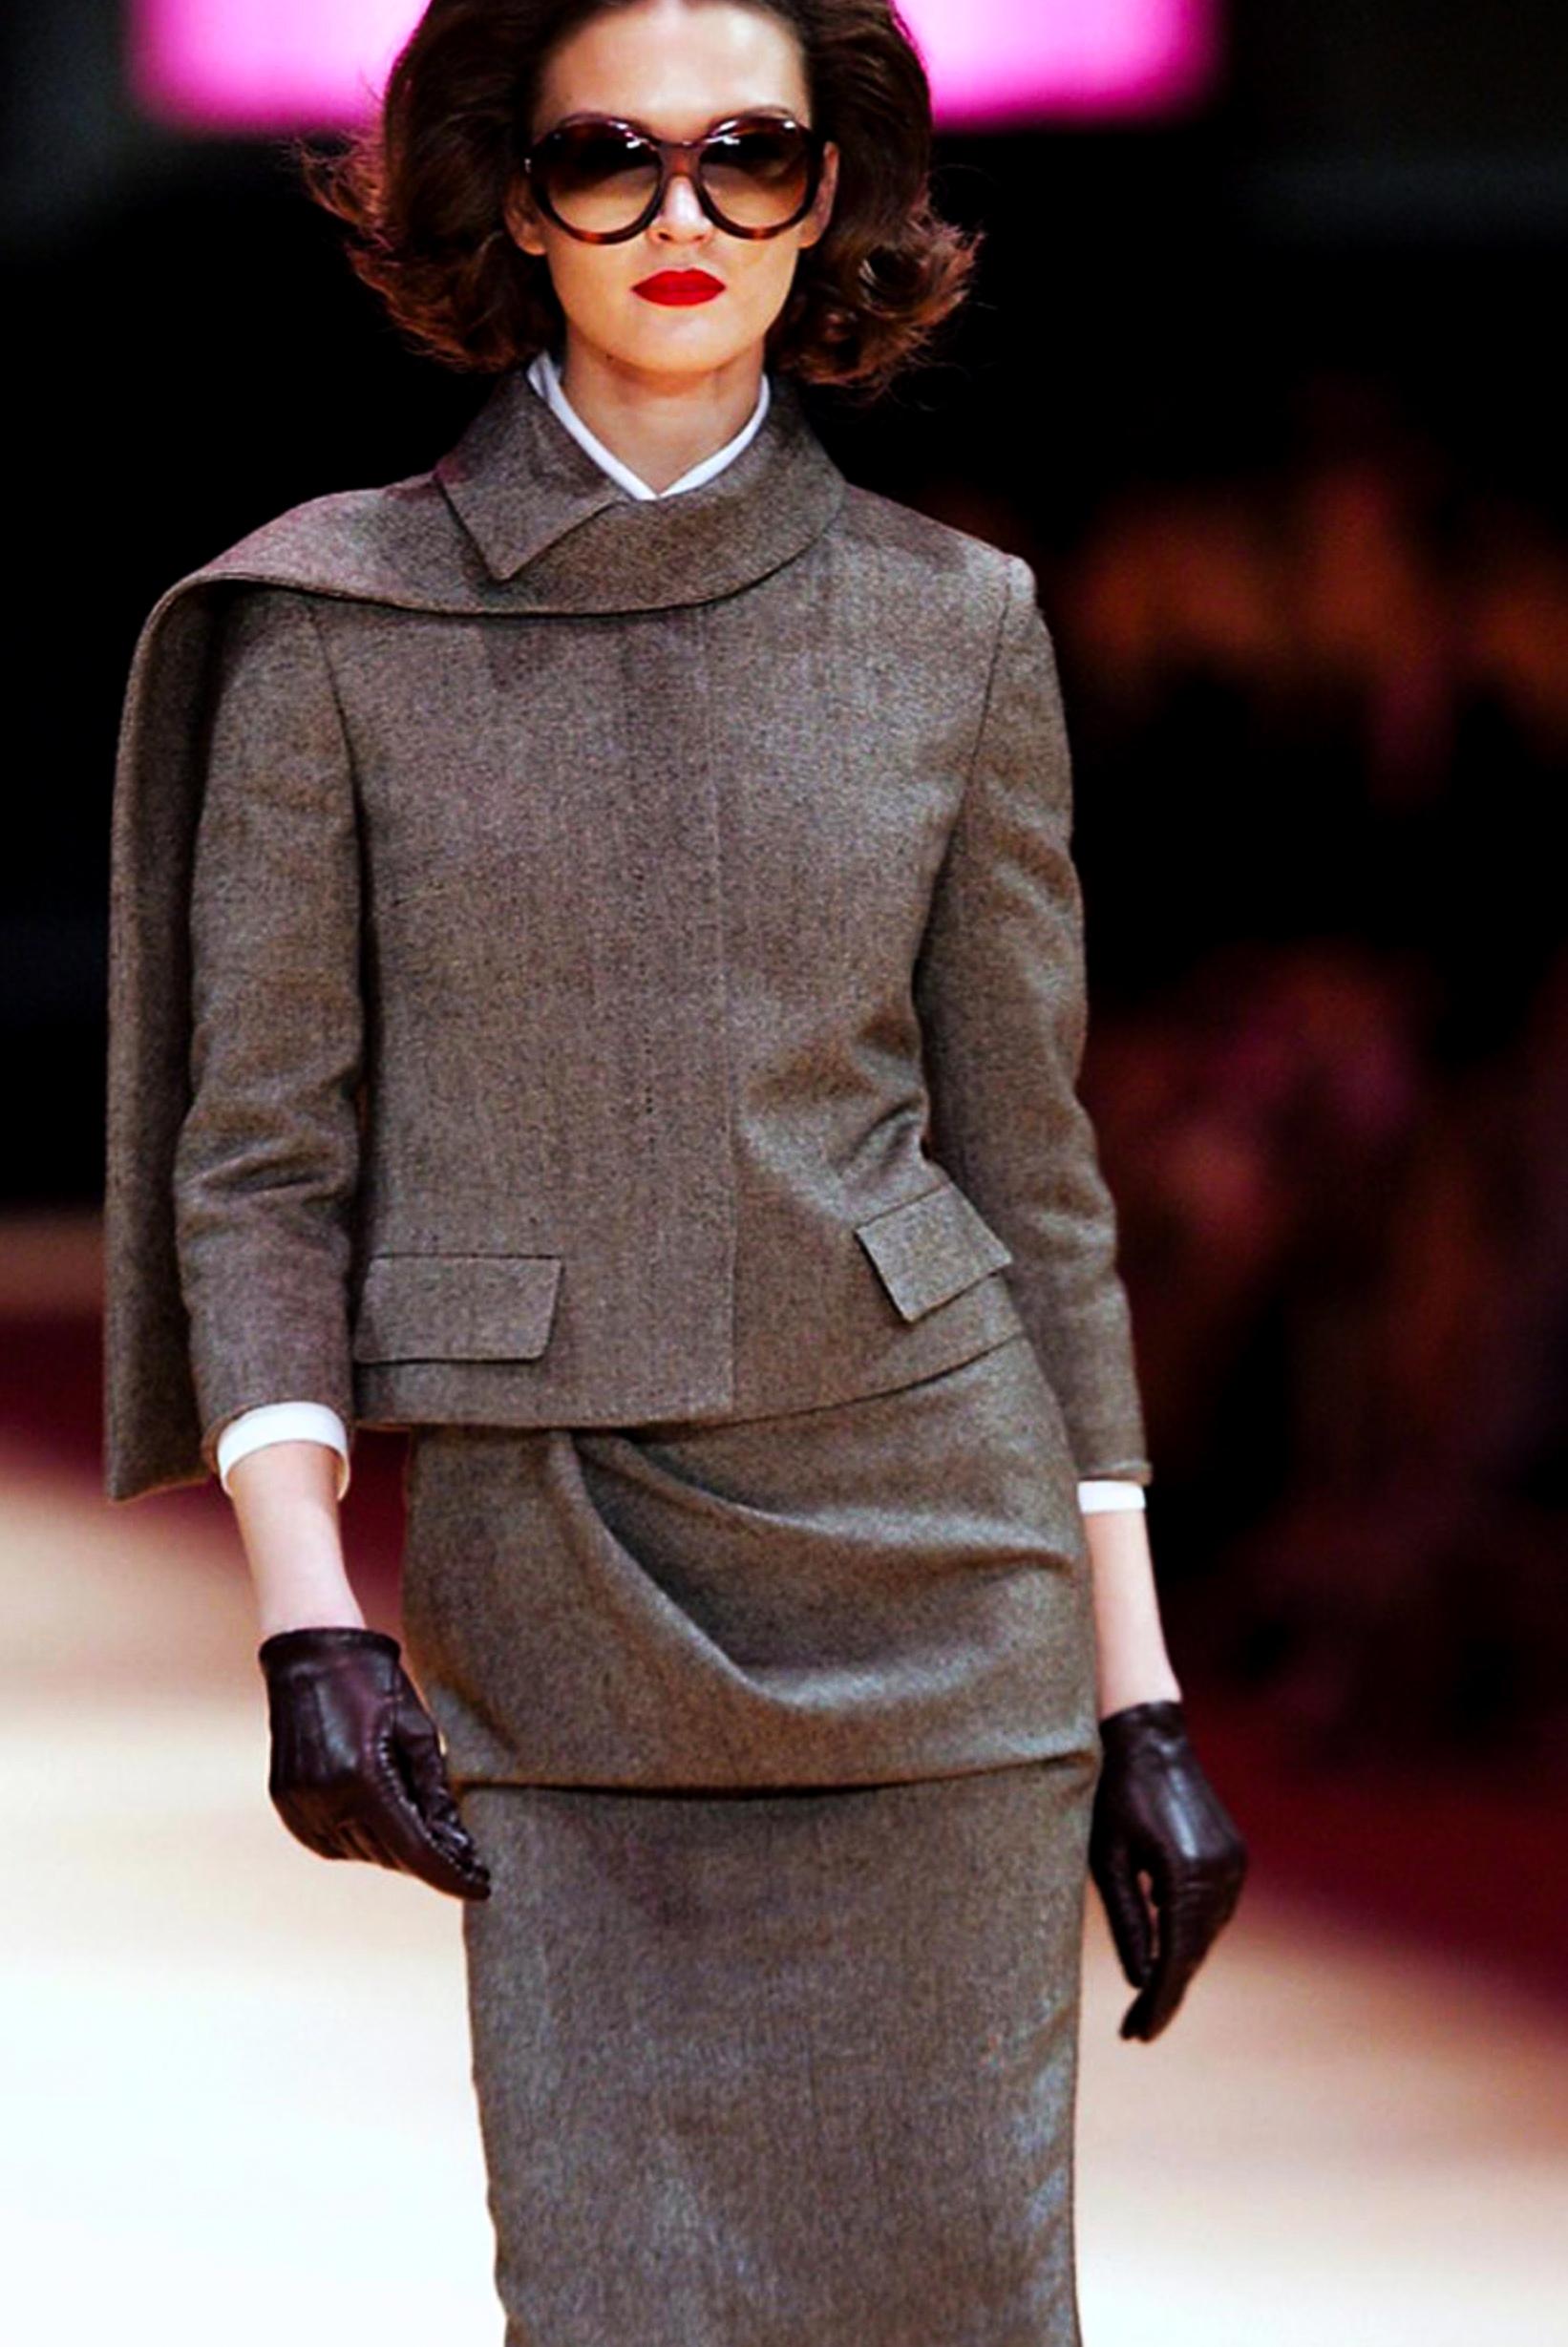 Rare Archival Alexander McQueen Skirt Suit
FW 2005 Collection 'The Man Who Knew Too Much' 

Timless elegant with the special McQueen edge! Drama & Elegance! 
Stunning piece tweed skirt suit from Lee McQueen's Hitchcock themed Collection.
A fabulous